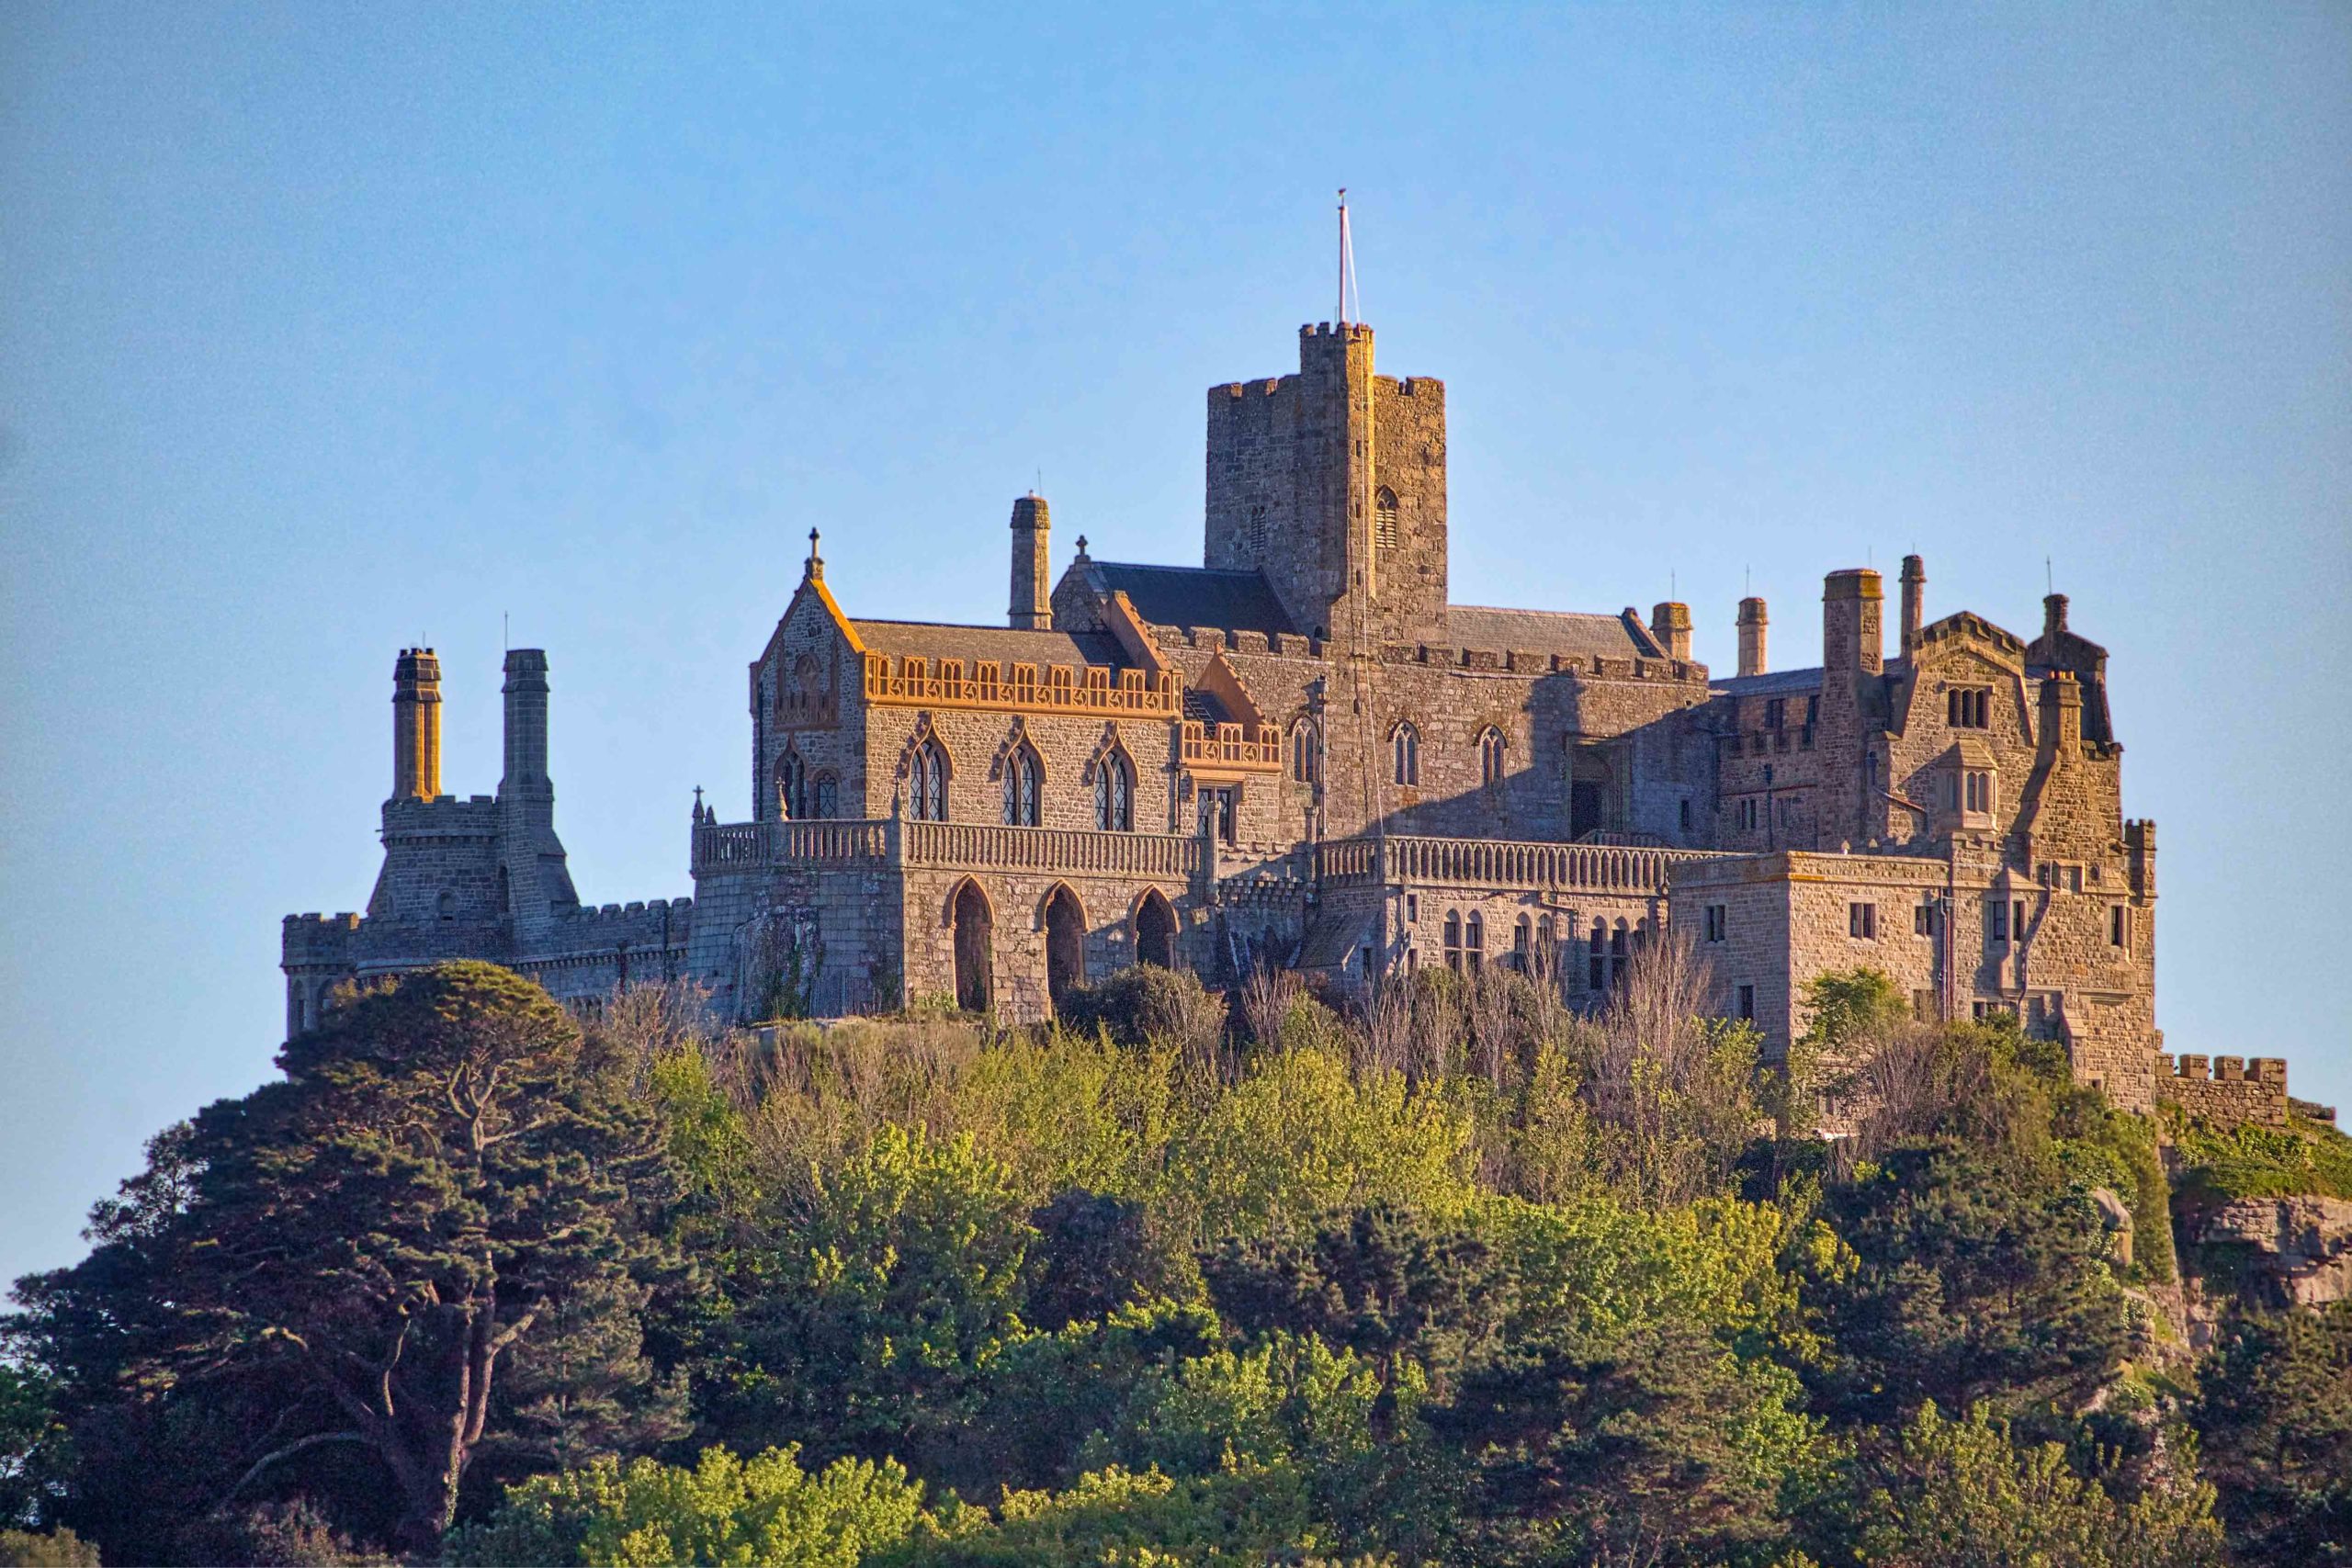 St Michael's Mount Castle © Marktee1 - licence [CC BY-SA 4.0] from Wikimedia Commons